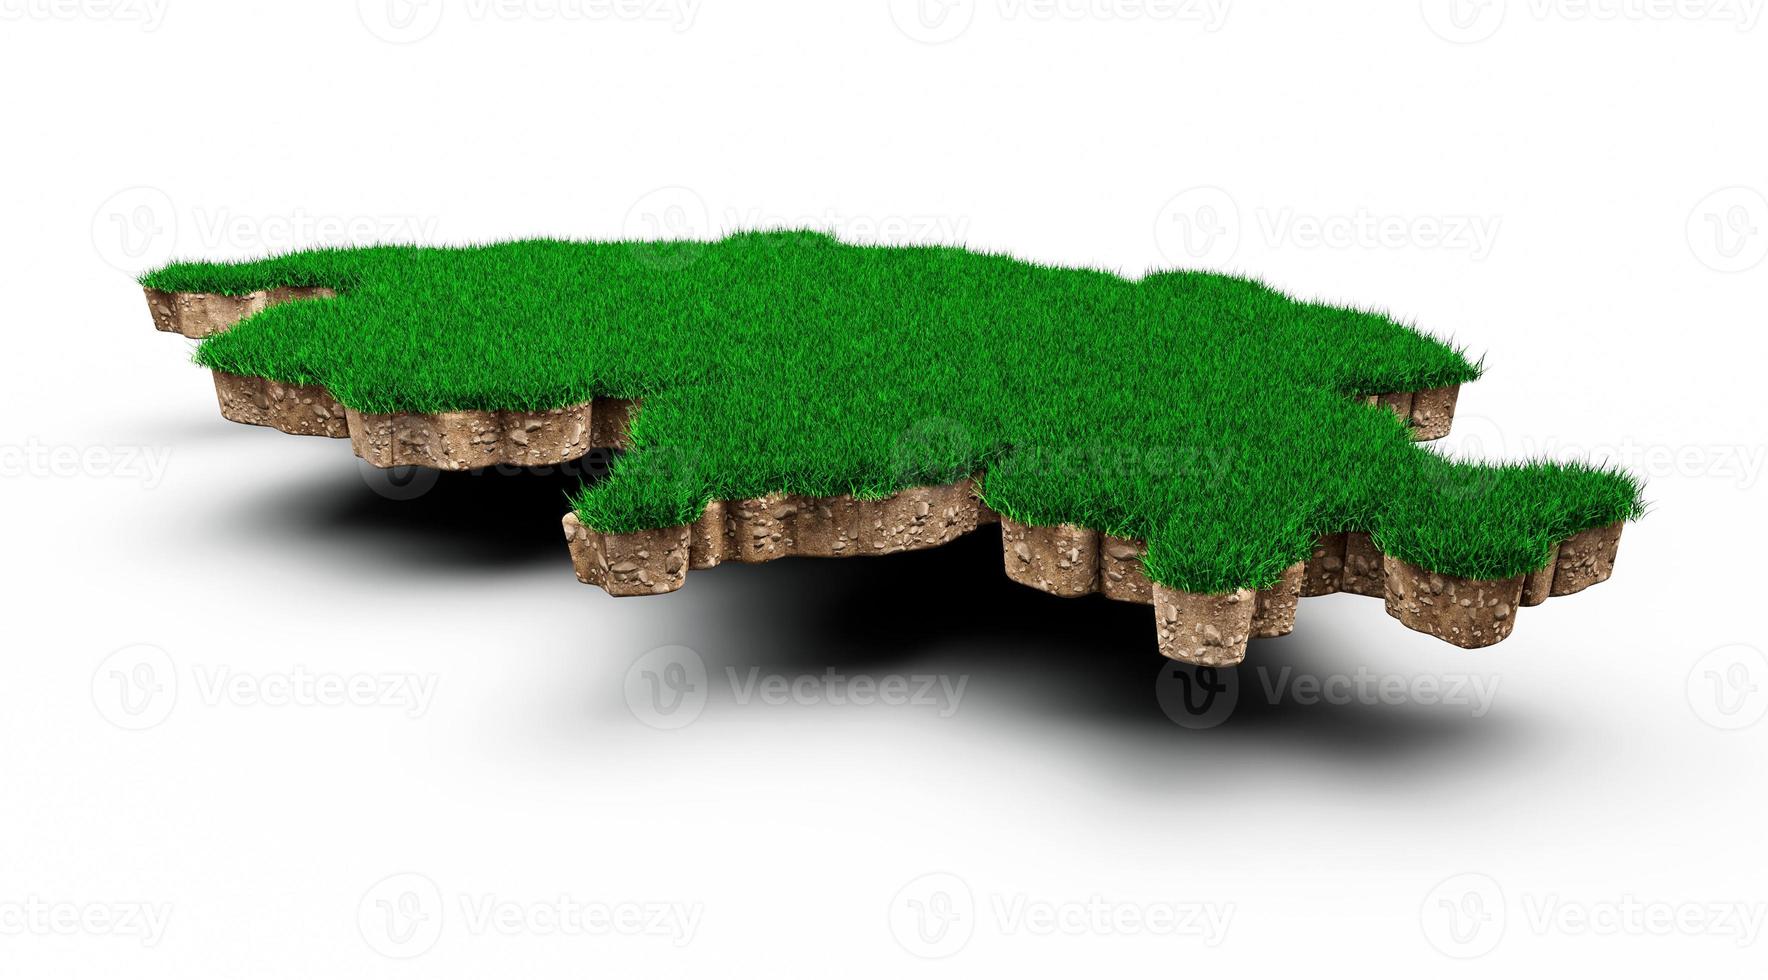 Switzerland Map soil land geology cross section with green grass and Rock ground texture 3d illustration photo